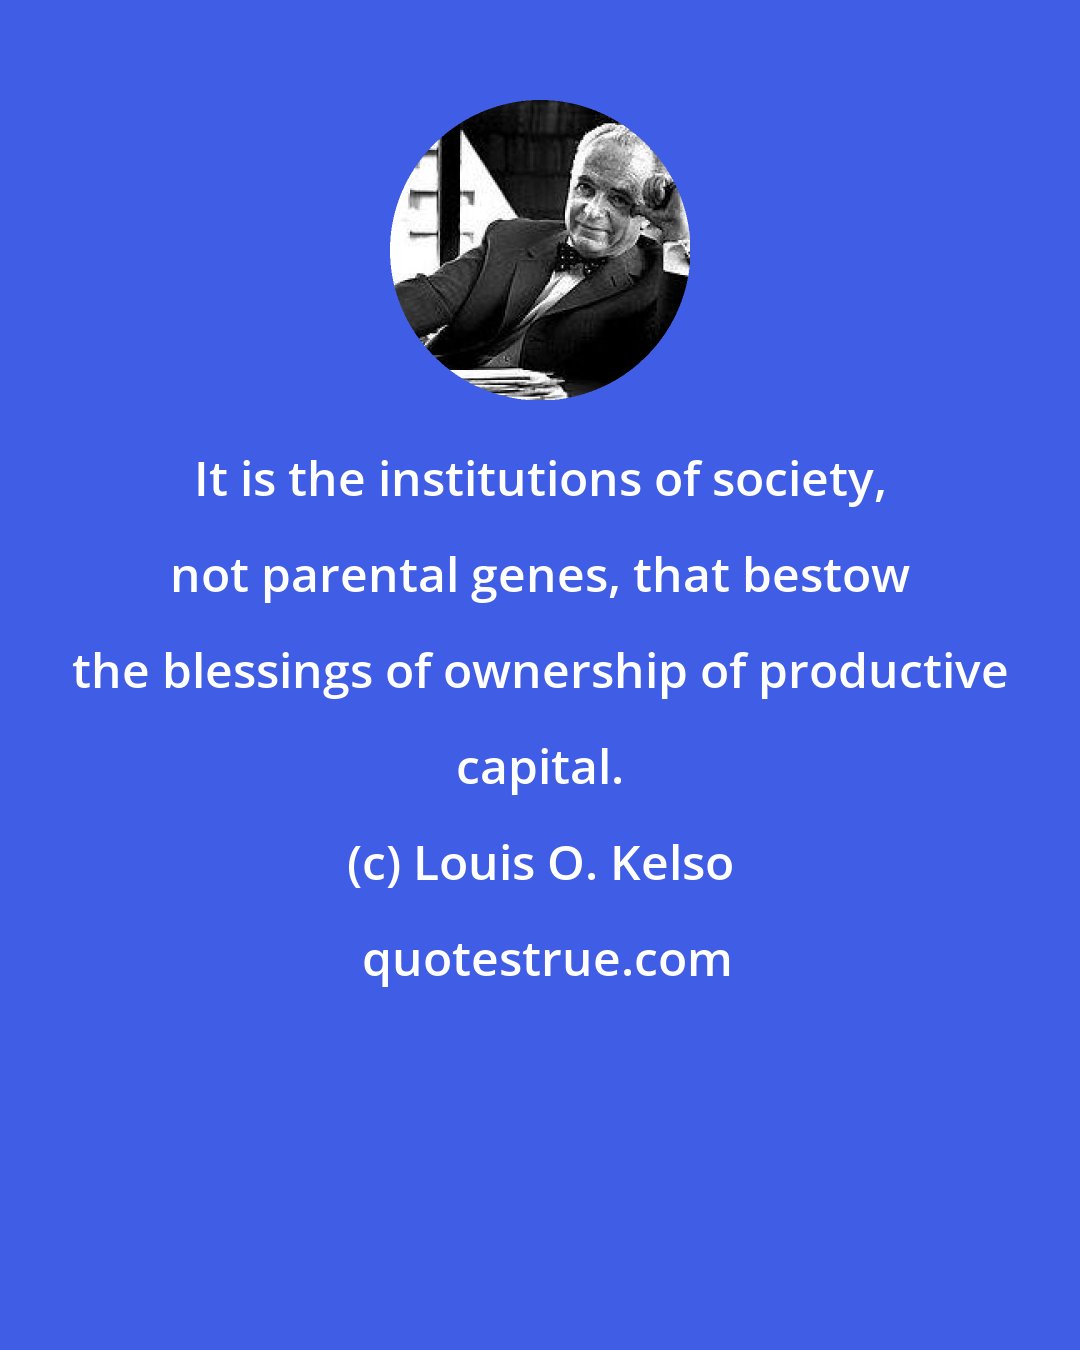 Louis O. Kelso: It is the institutions of society, not parental genes, that bestow the blessings of ownership of productive capital.